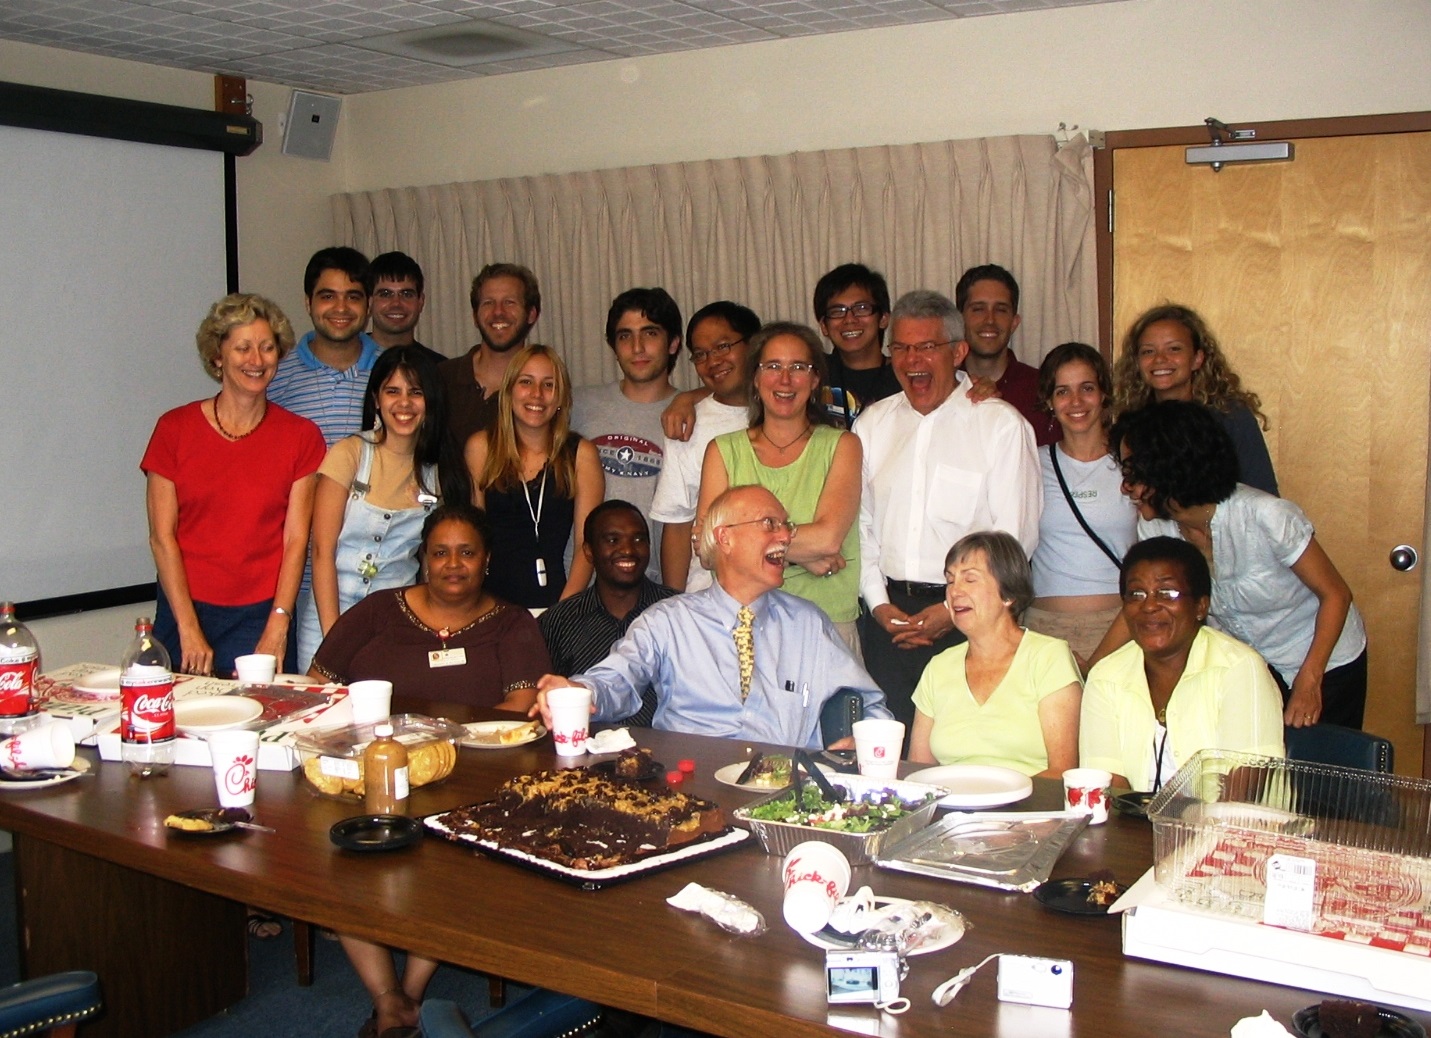 CGH Founding Director, Dr. Richard Guerrant with staff and fellows